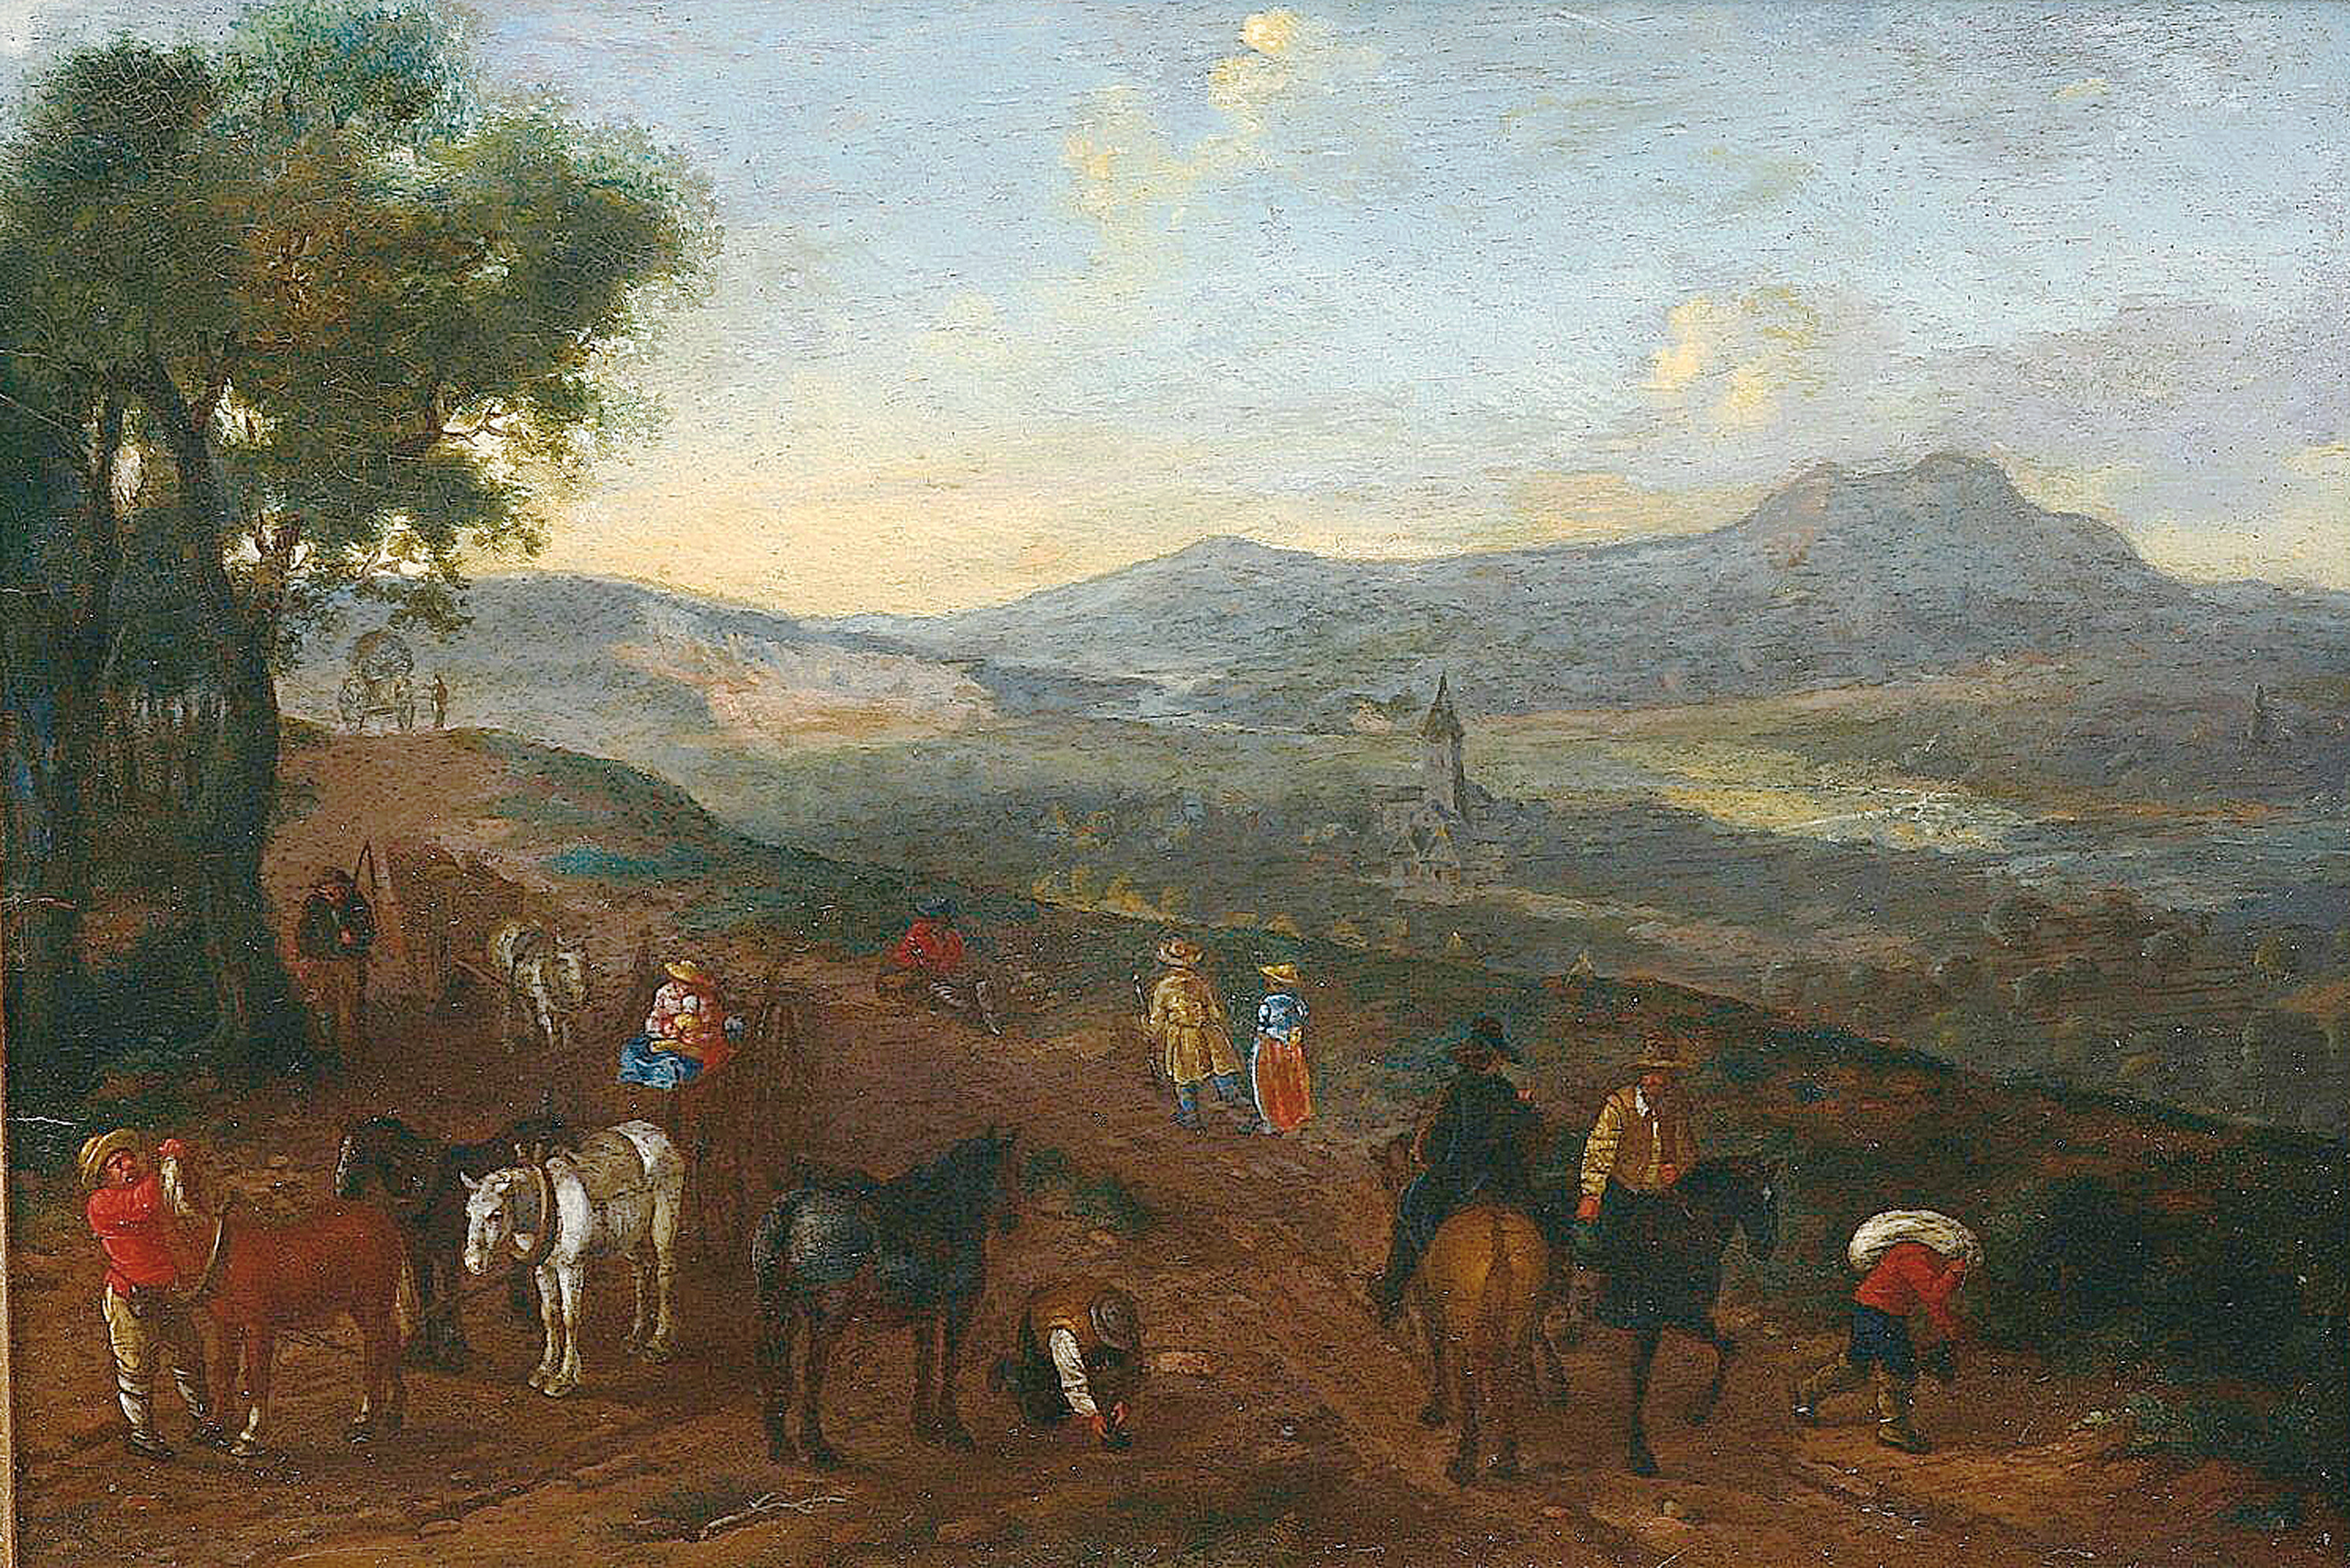 A landscape with riders, chariots and foot travellers